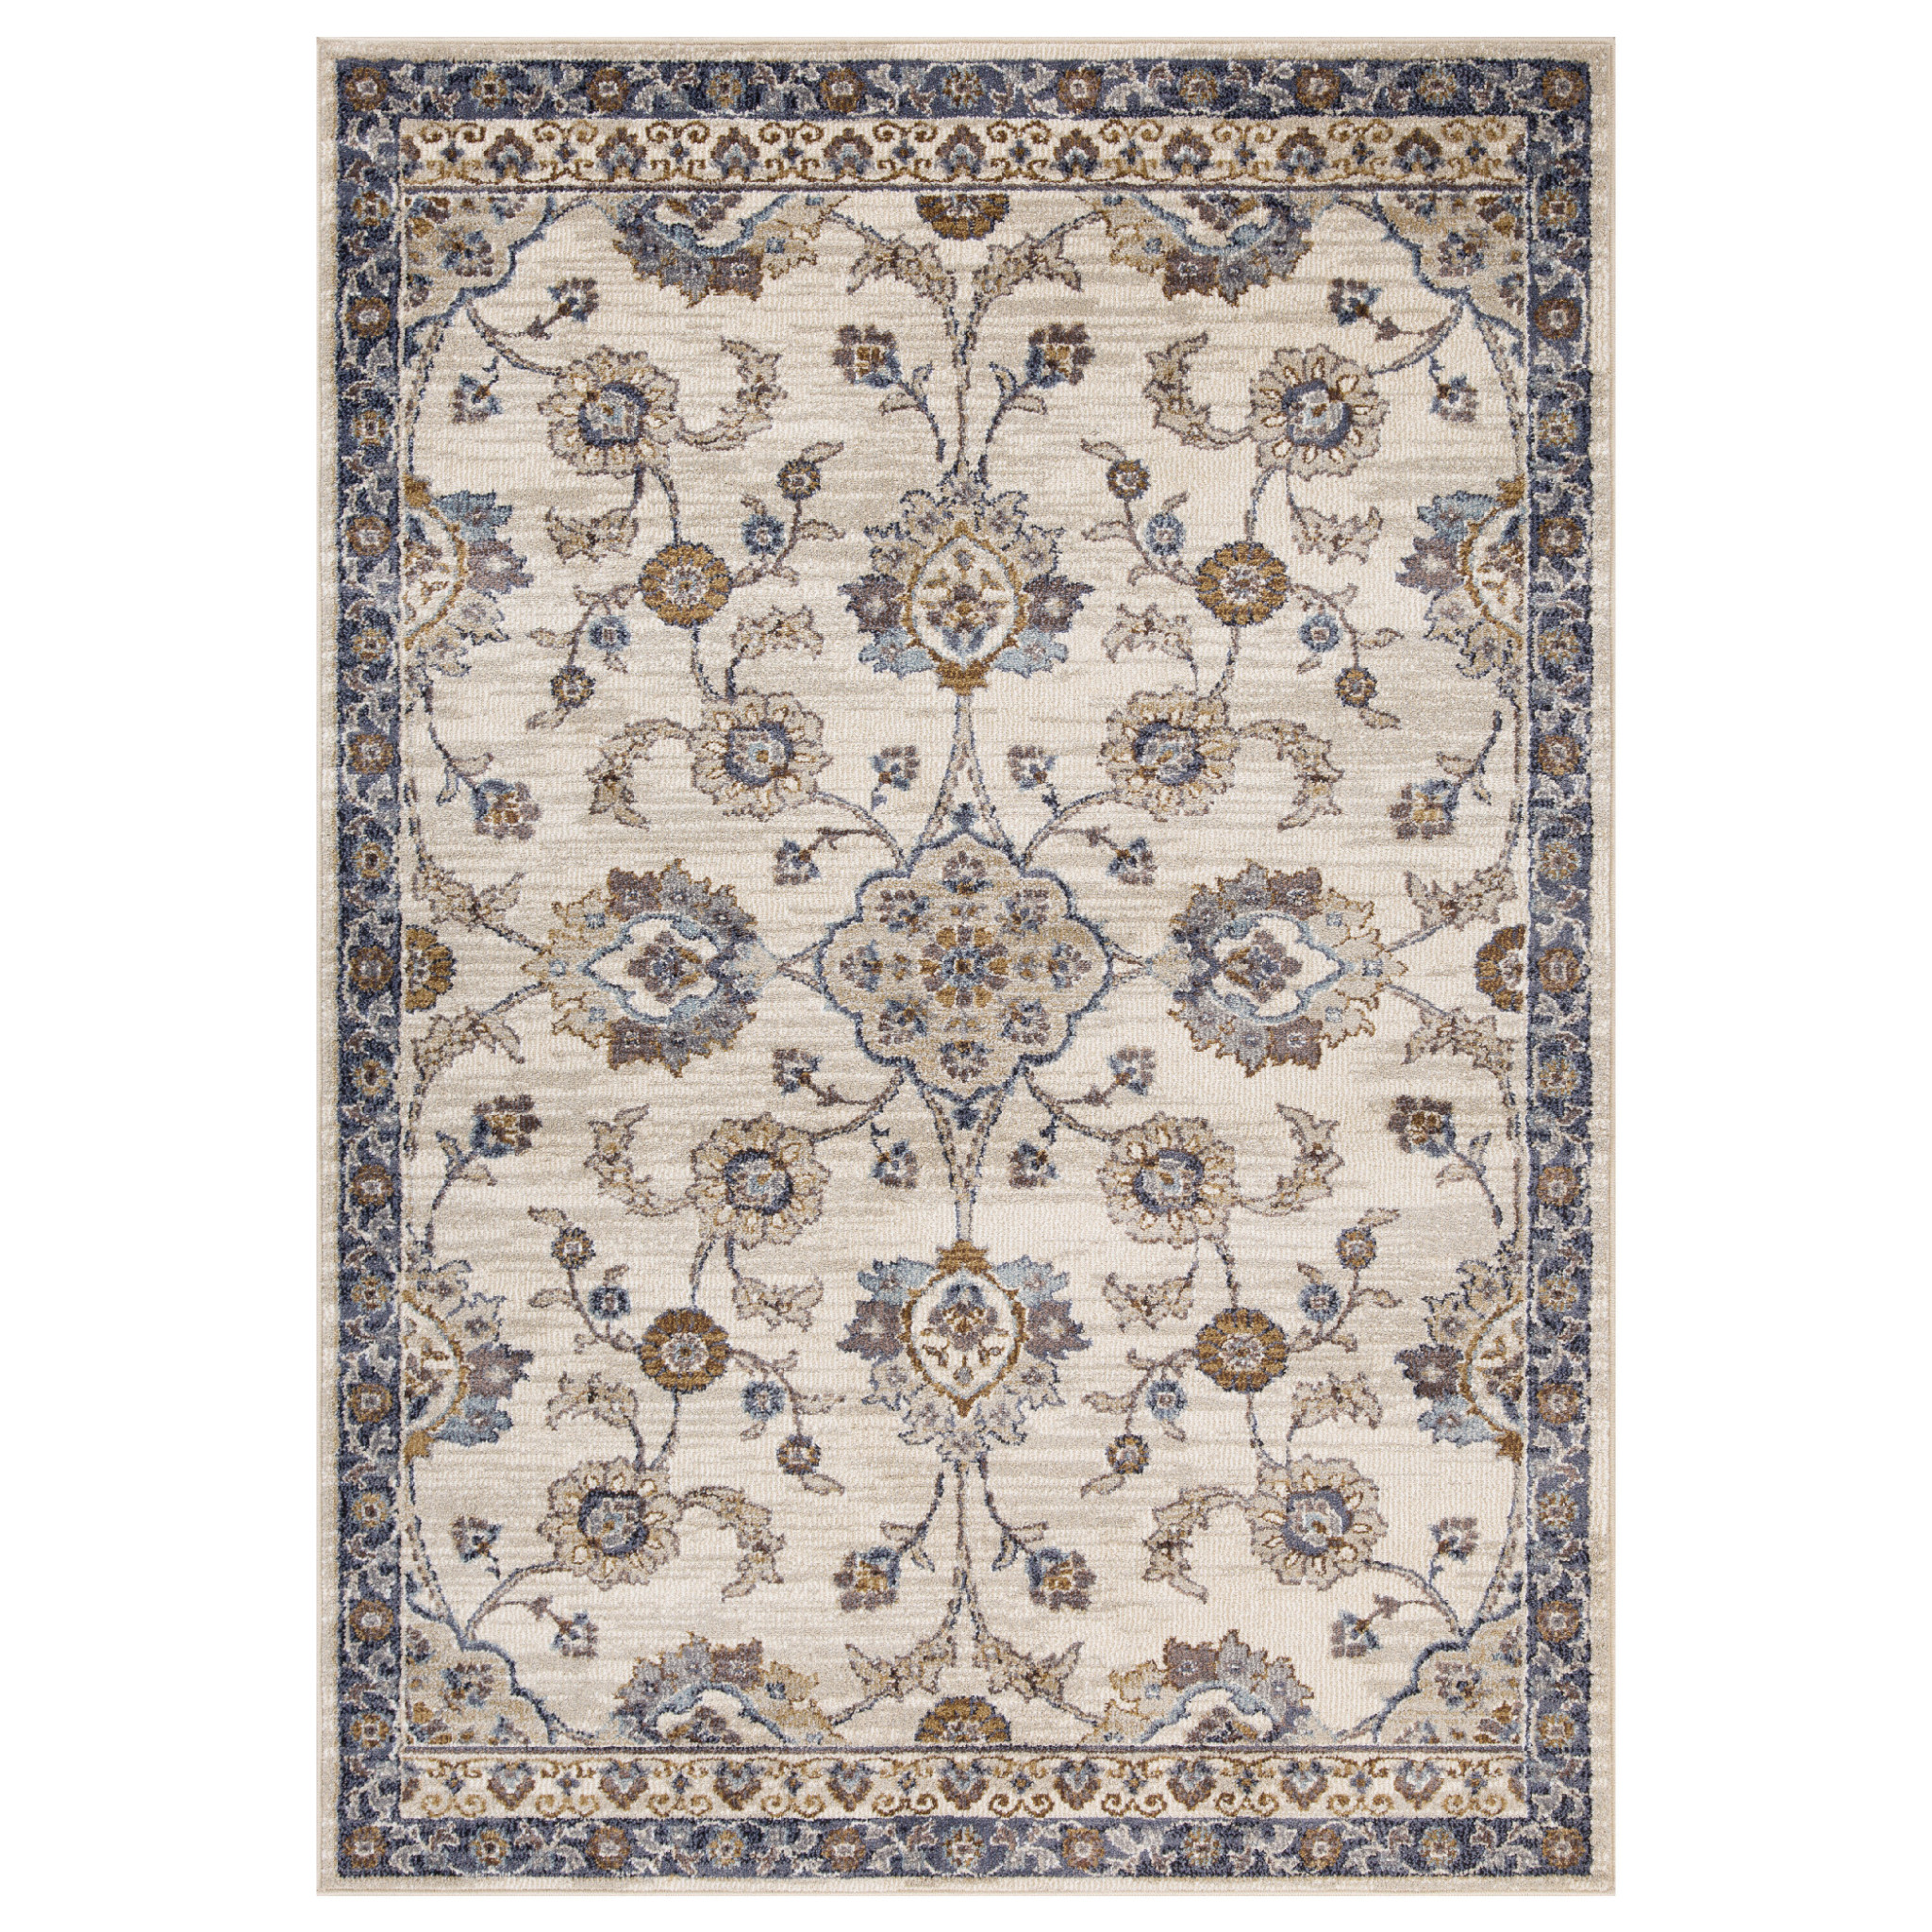 8' x 10' Gray and Ivory Floral Power Loom Area Rug-532175-1